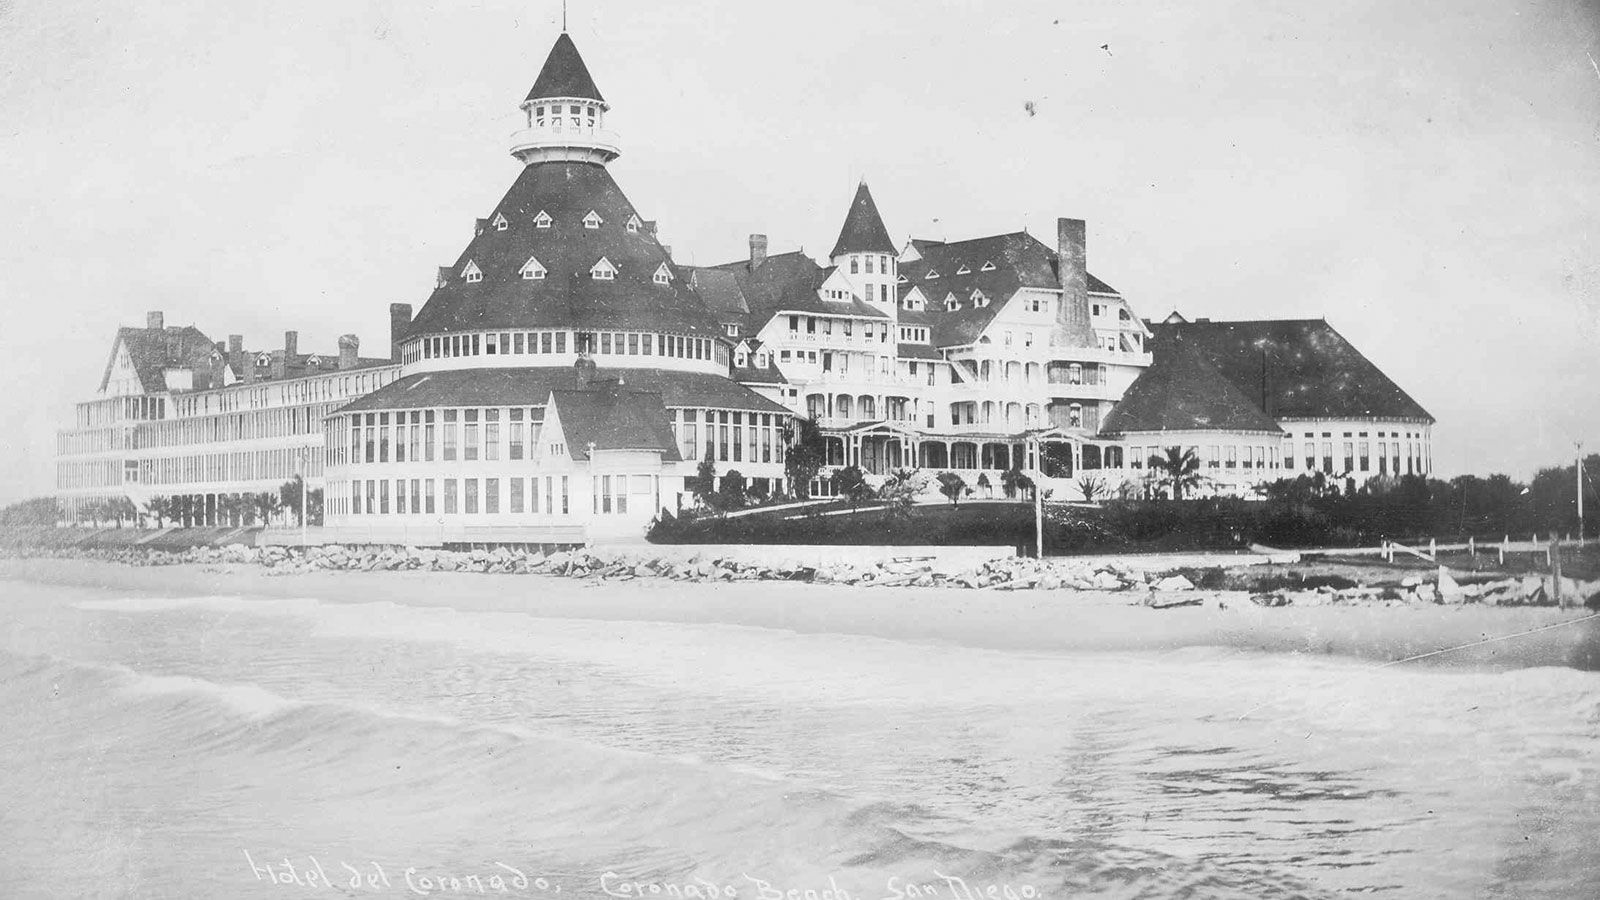 Image of the ocean and of the Hotel Del Coronado, Curio Collection by Hilton